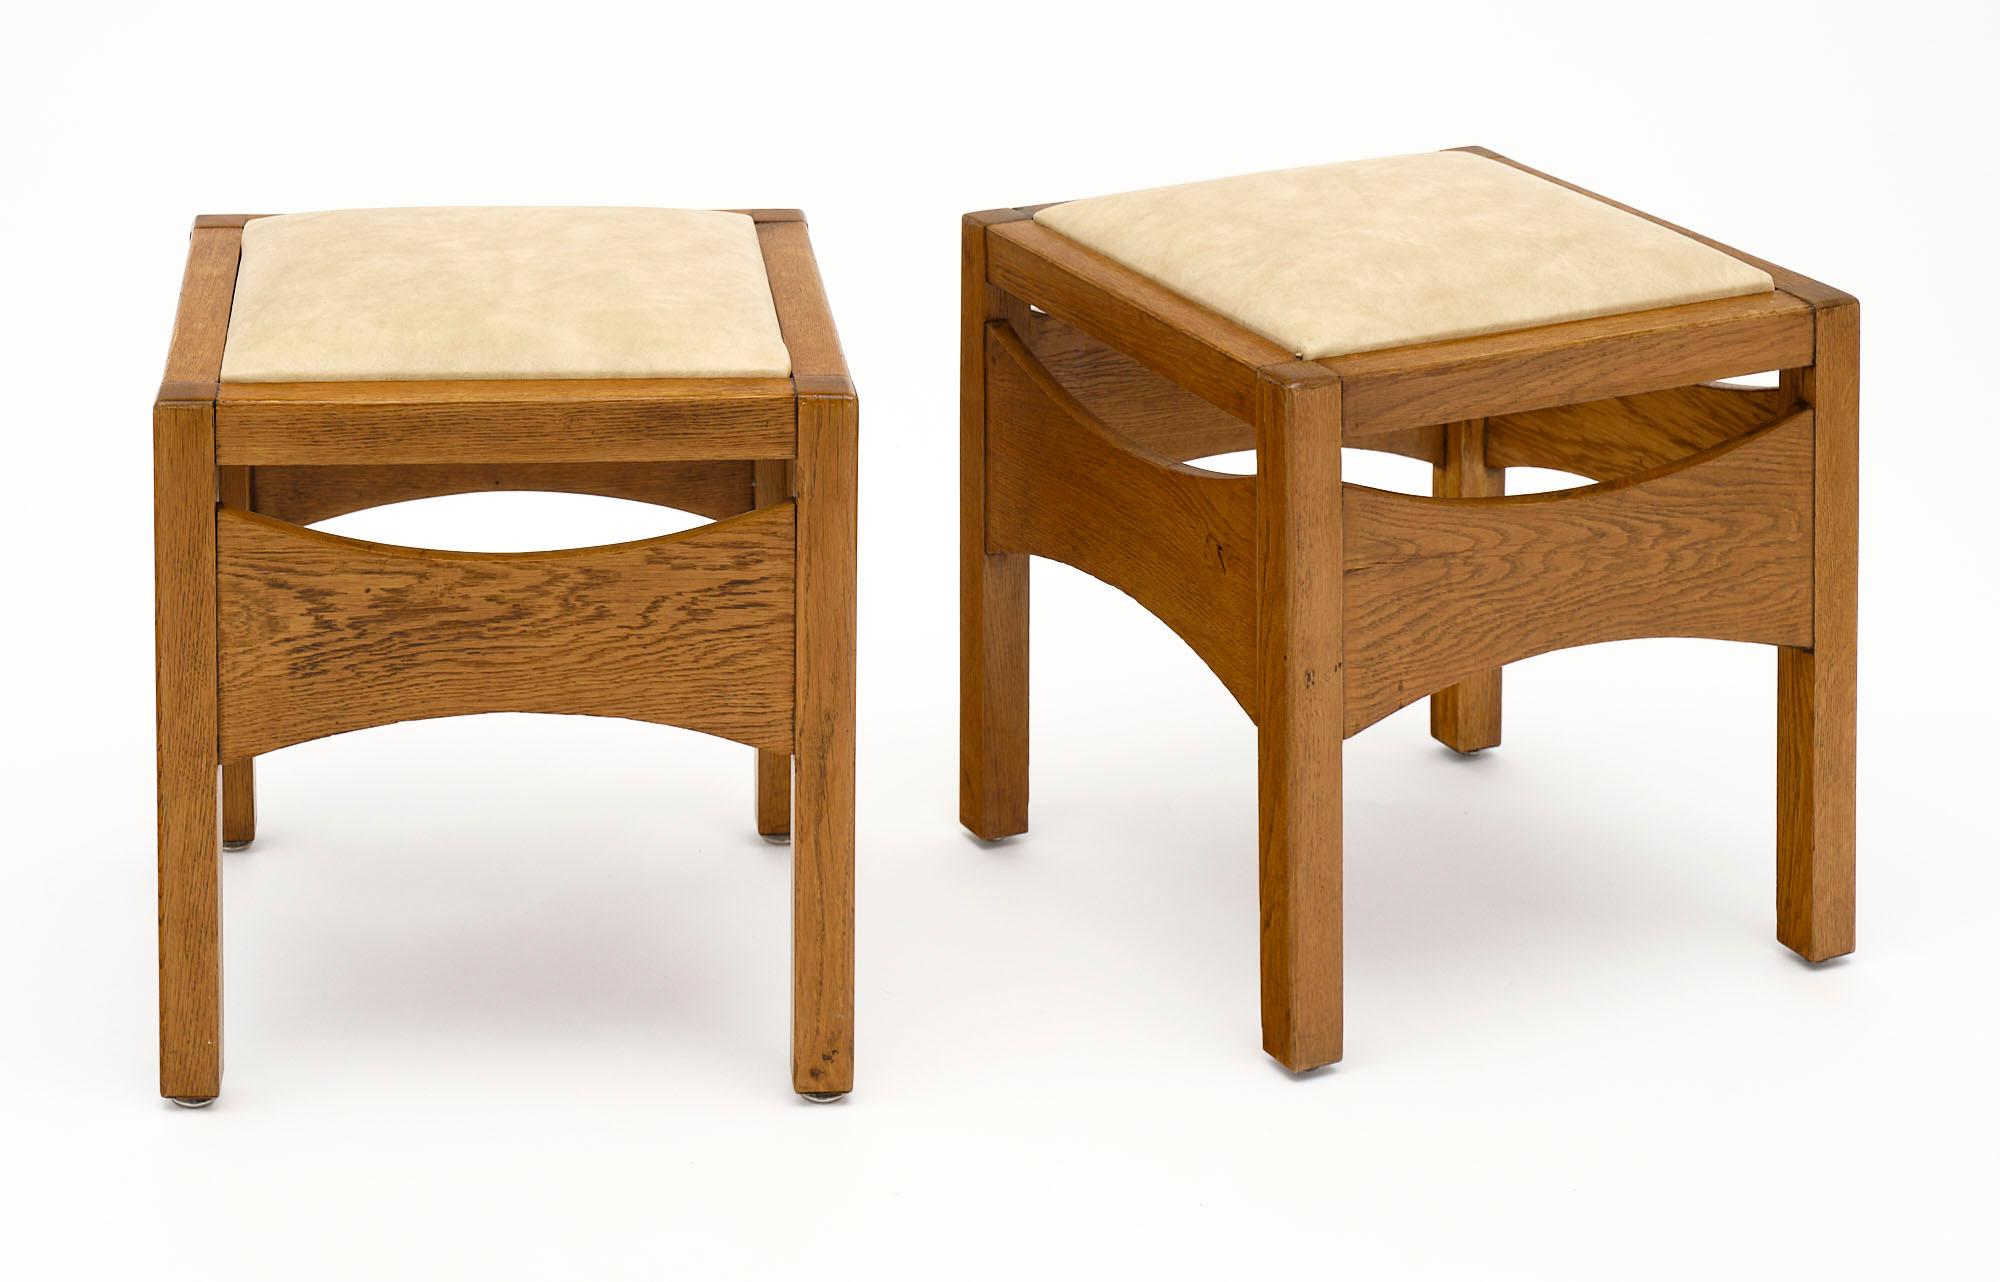 Pair of stools from France made of solid waxed oak in the style of Charlotte Perriand. The skai upholstery is original.